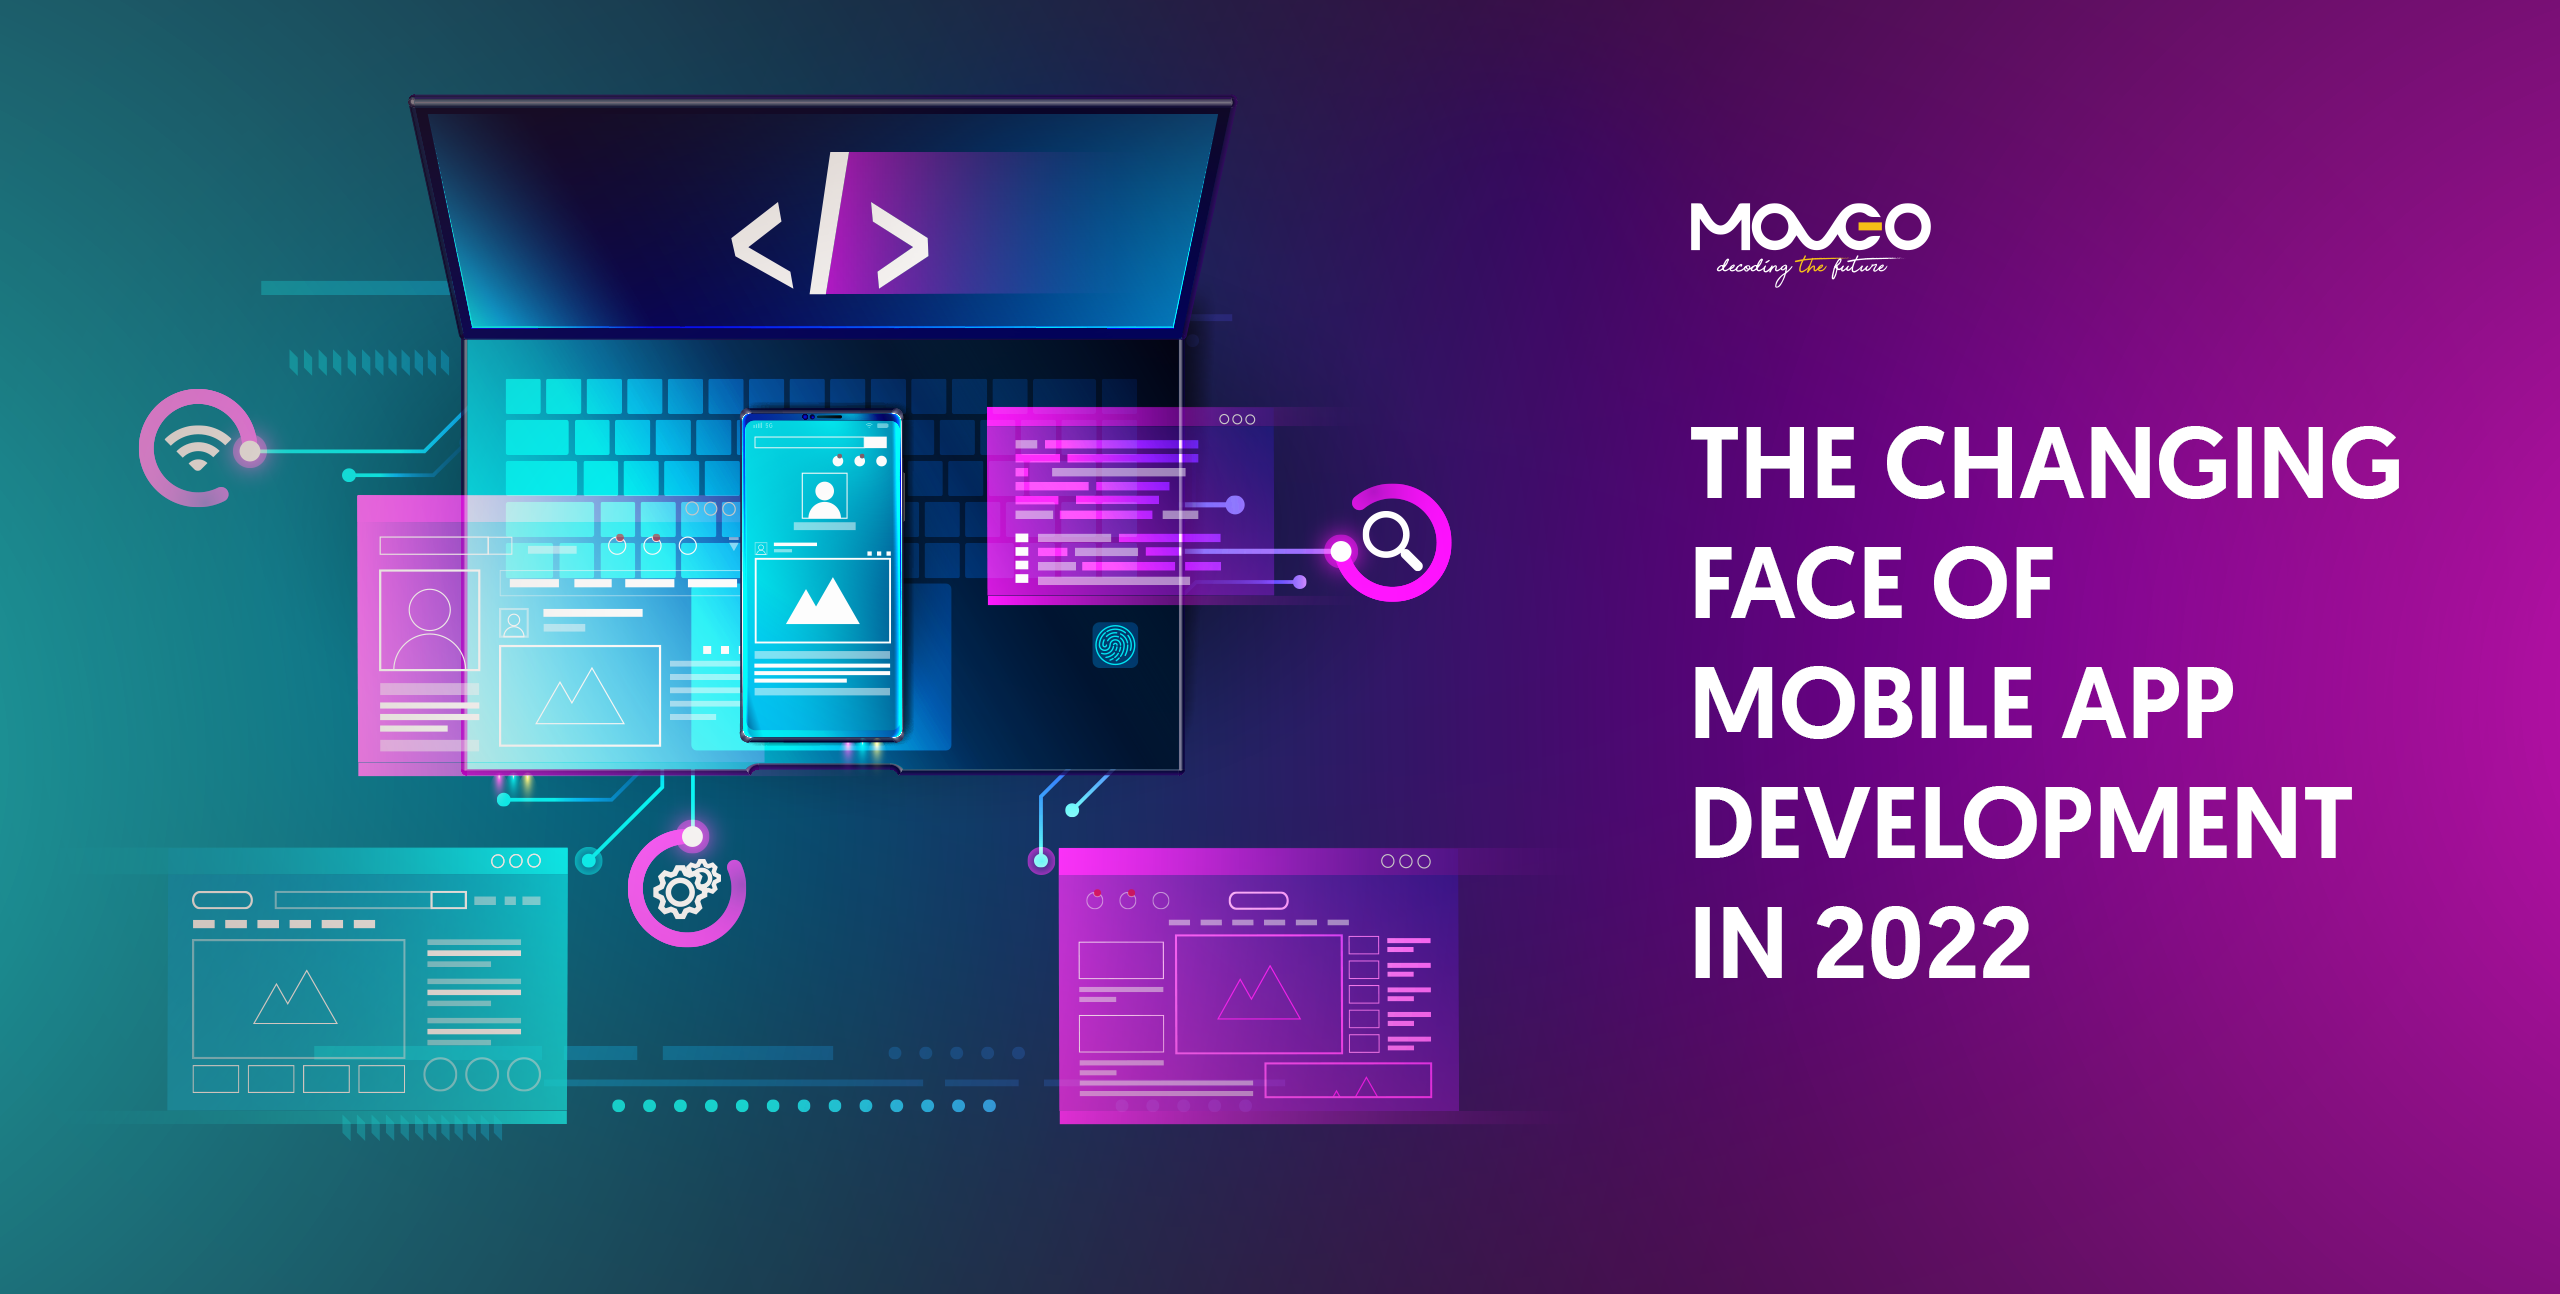 The Changing Face of Mobile App Development In 2022